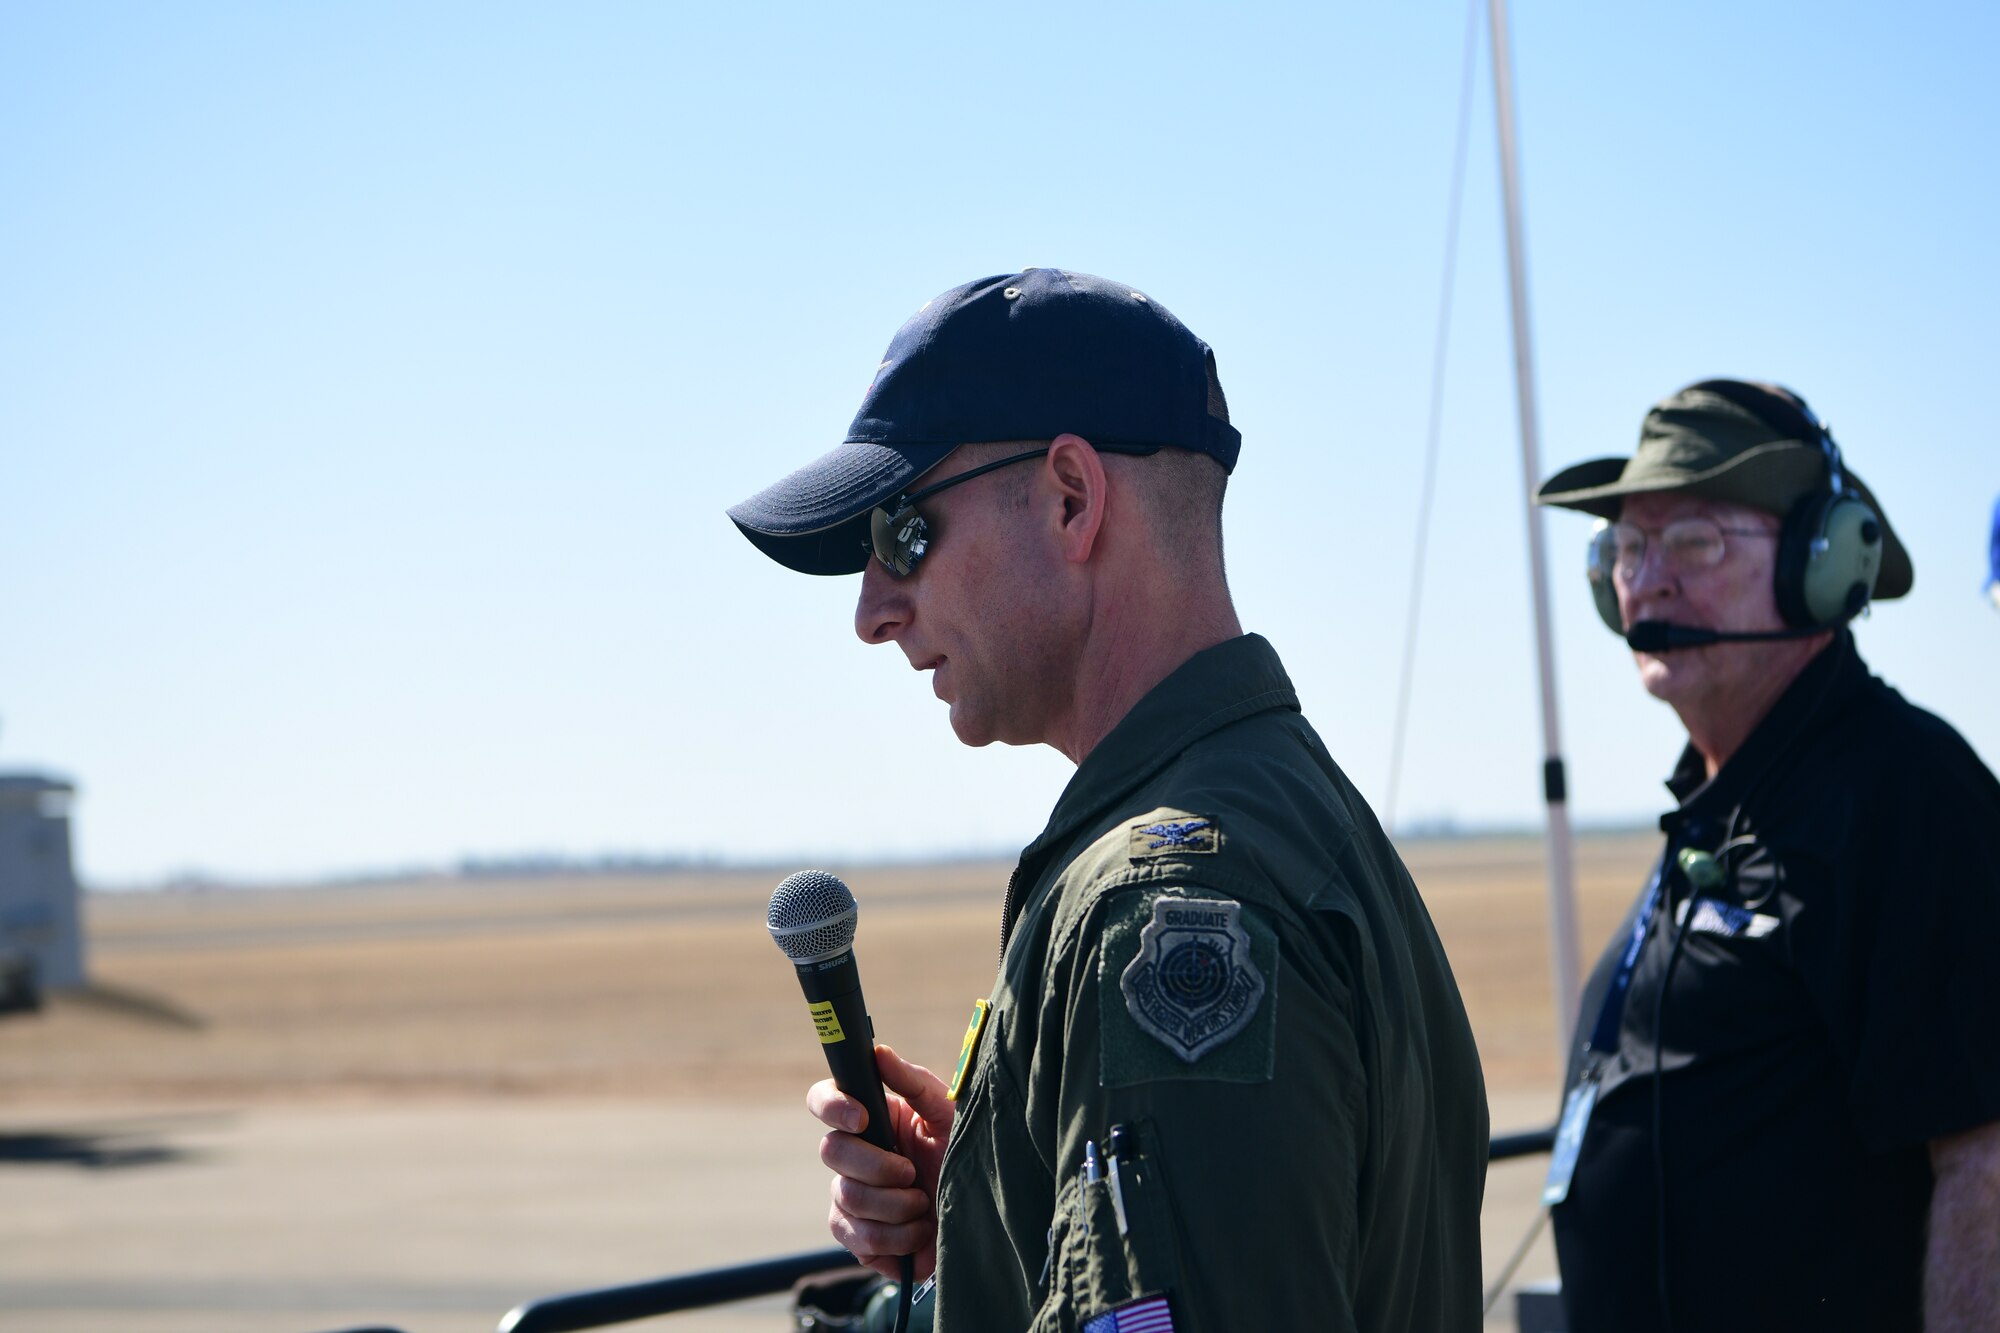 Col. Geoffrey Church, 9th Reconnaissance Wing commander, gave a speech during the California Capital Airshow at the Mather Airport, Mather, Calif., on Oct. 2, 2022.